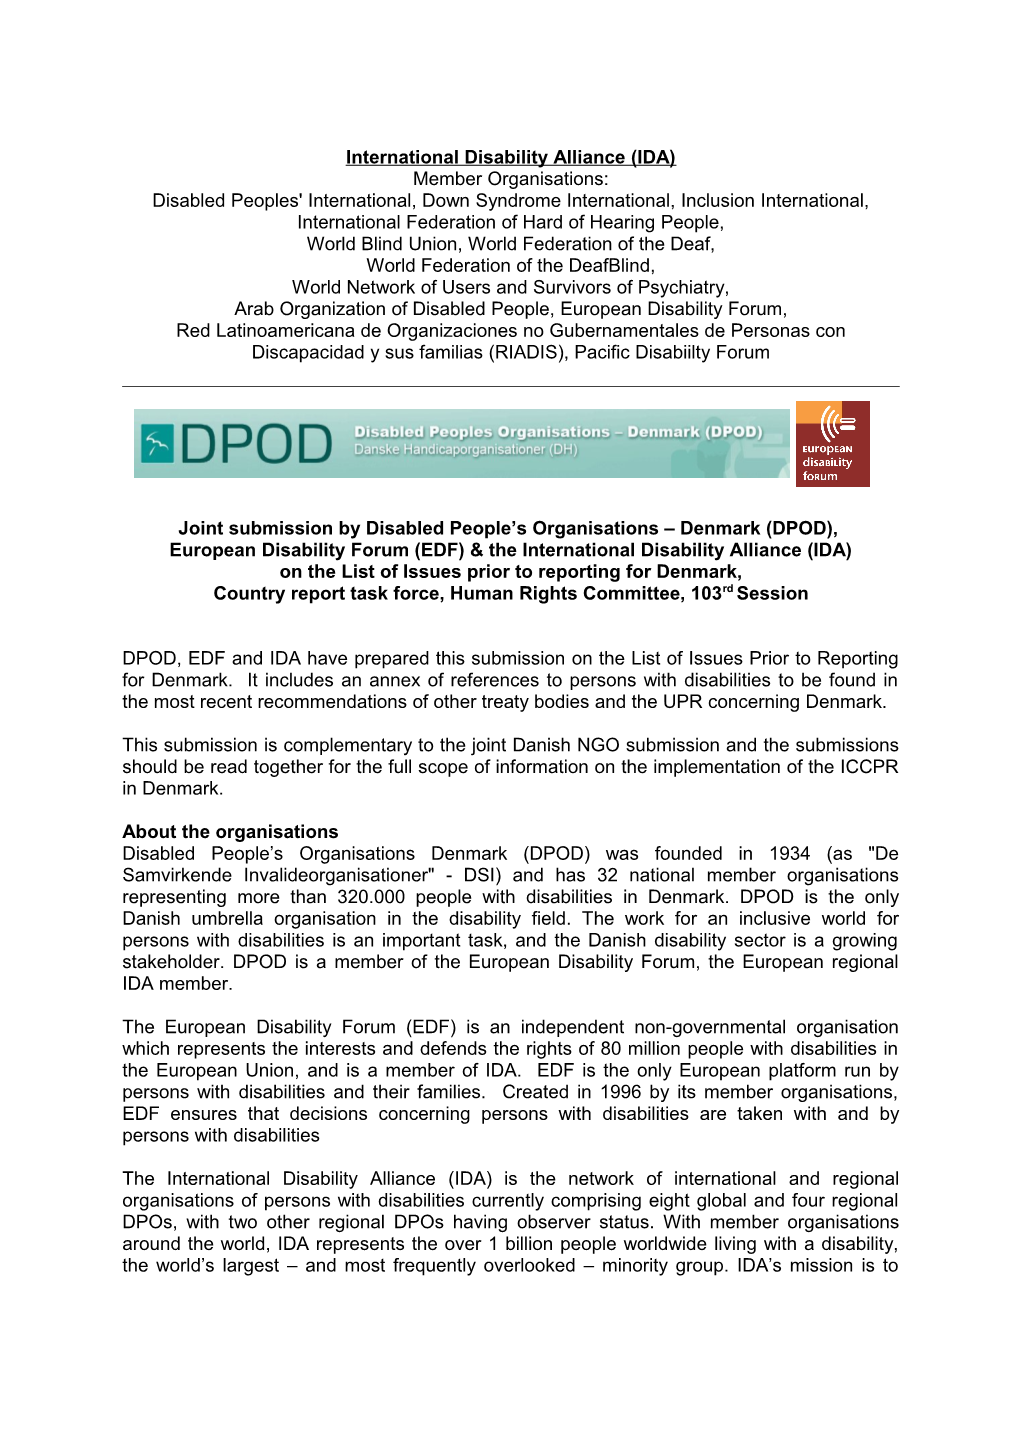 DPOD, EDF & IDA Suggested Questions for the Loipr on Denmark